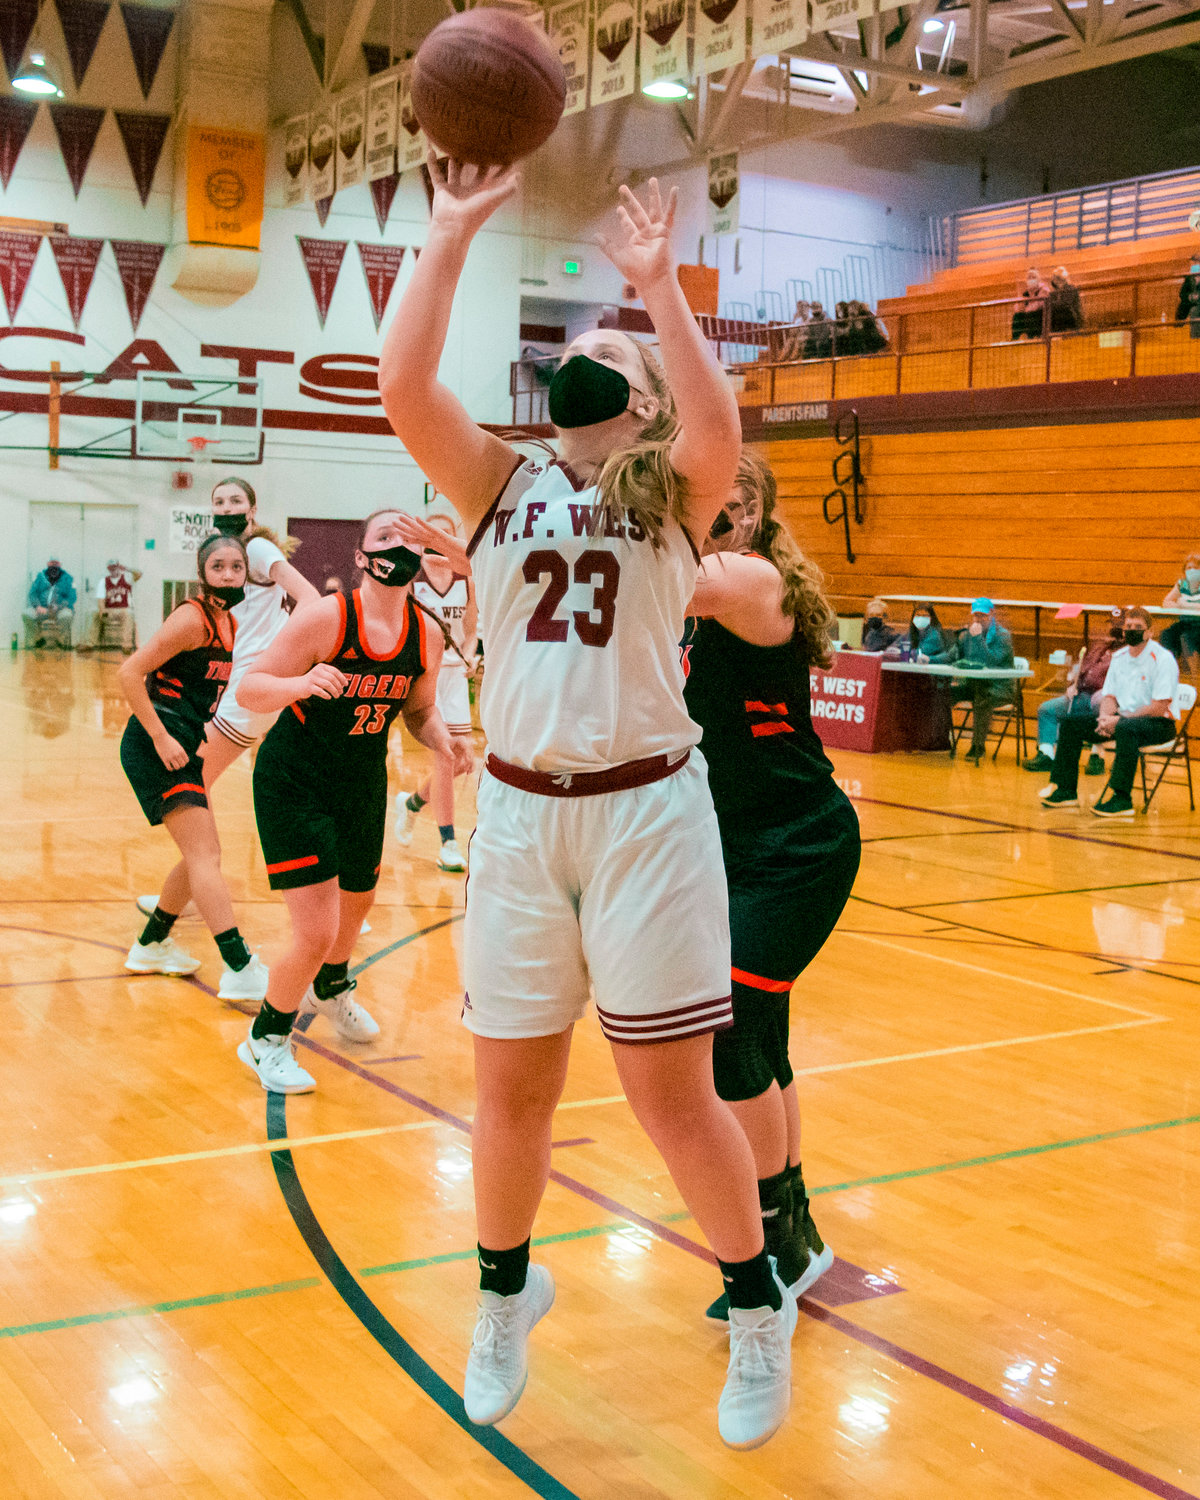 W.F. West’s Carlie Deskins (23) goes up with the ball during a game against the Tigers played Monday night in Chehalis.